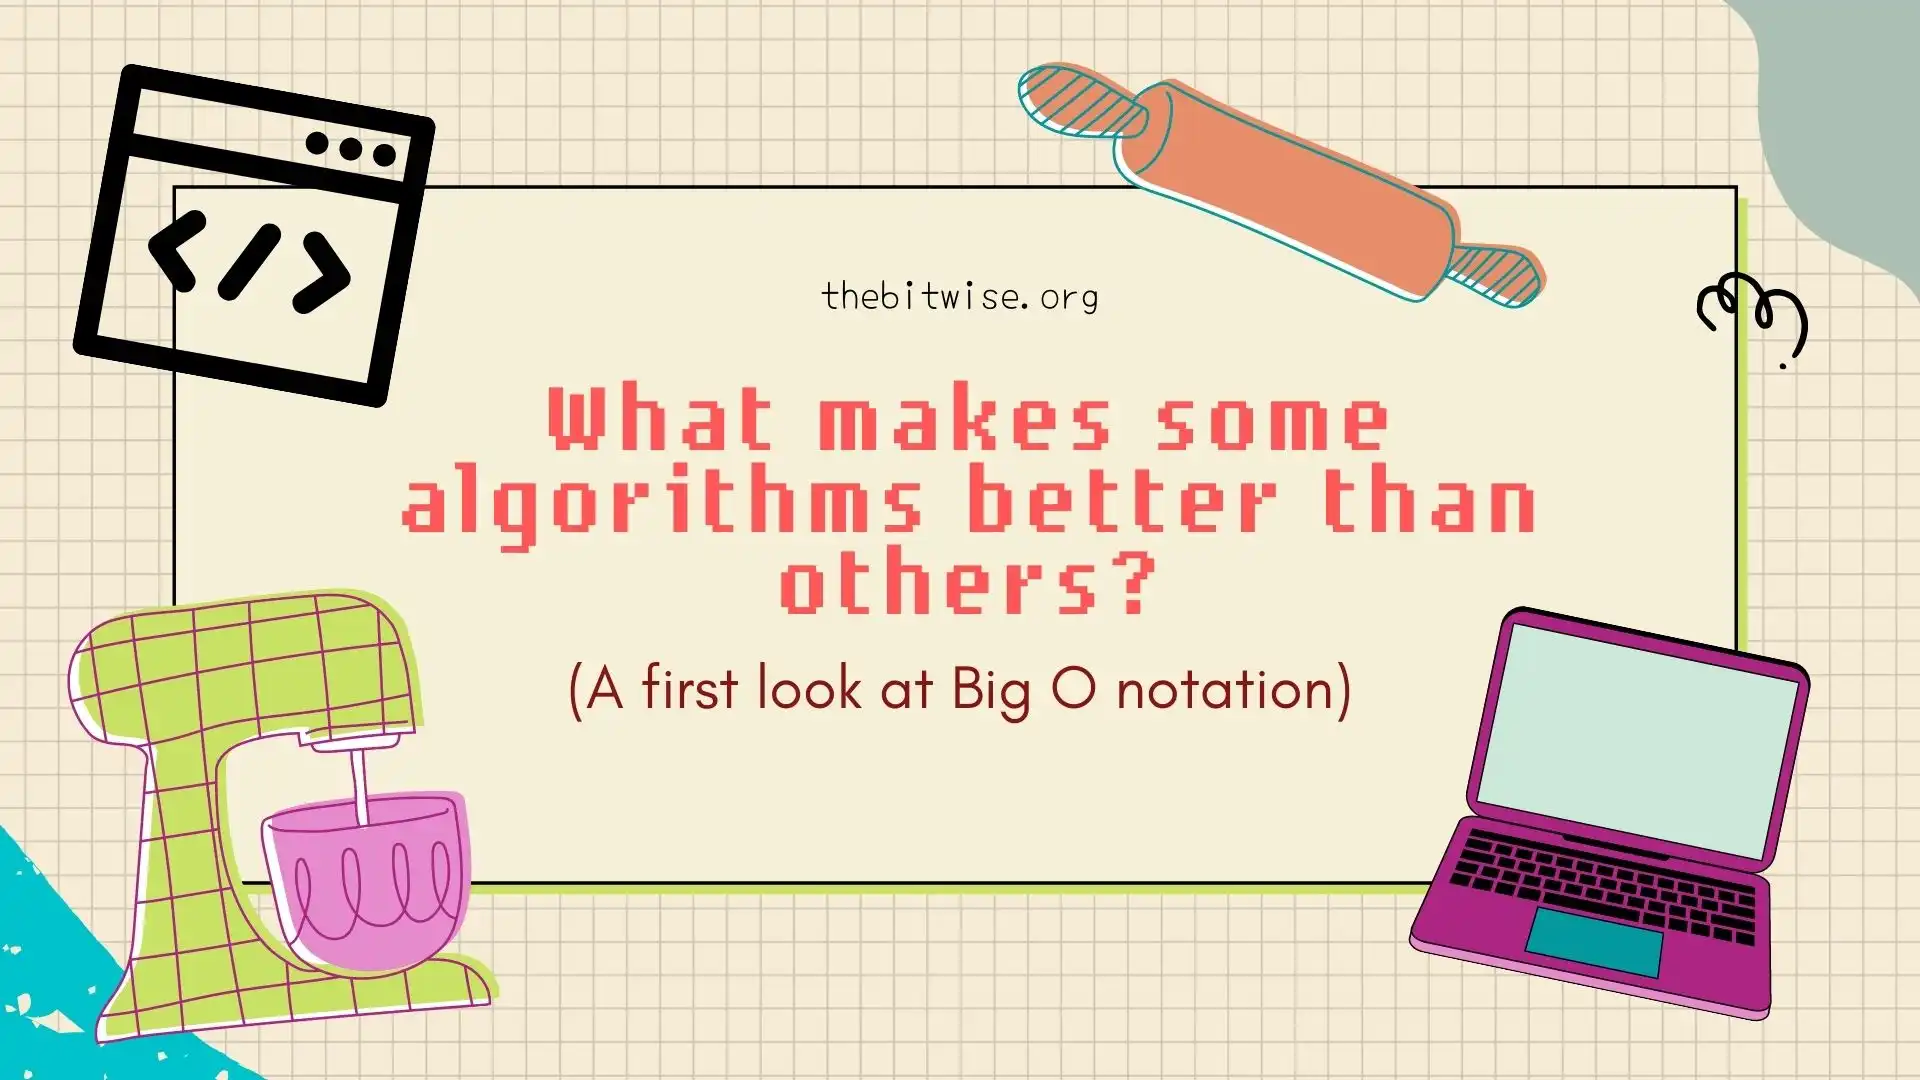 What Makes Some Algorithms Better and a First Look at Big O Notation